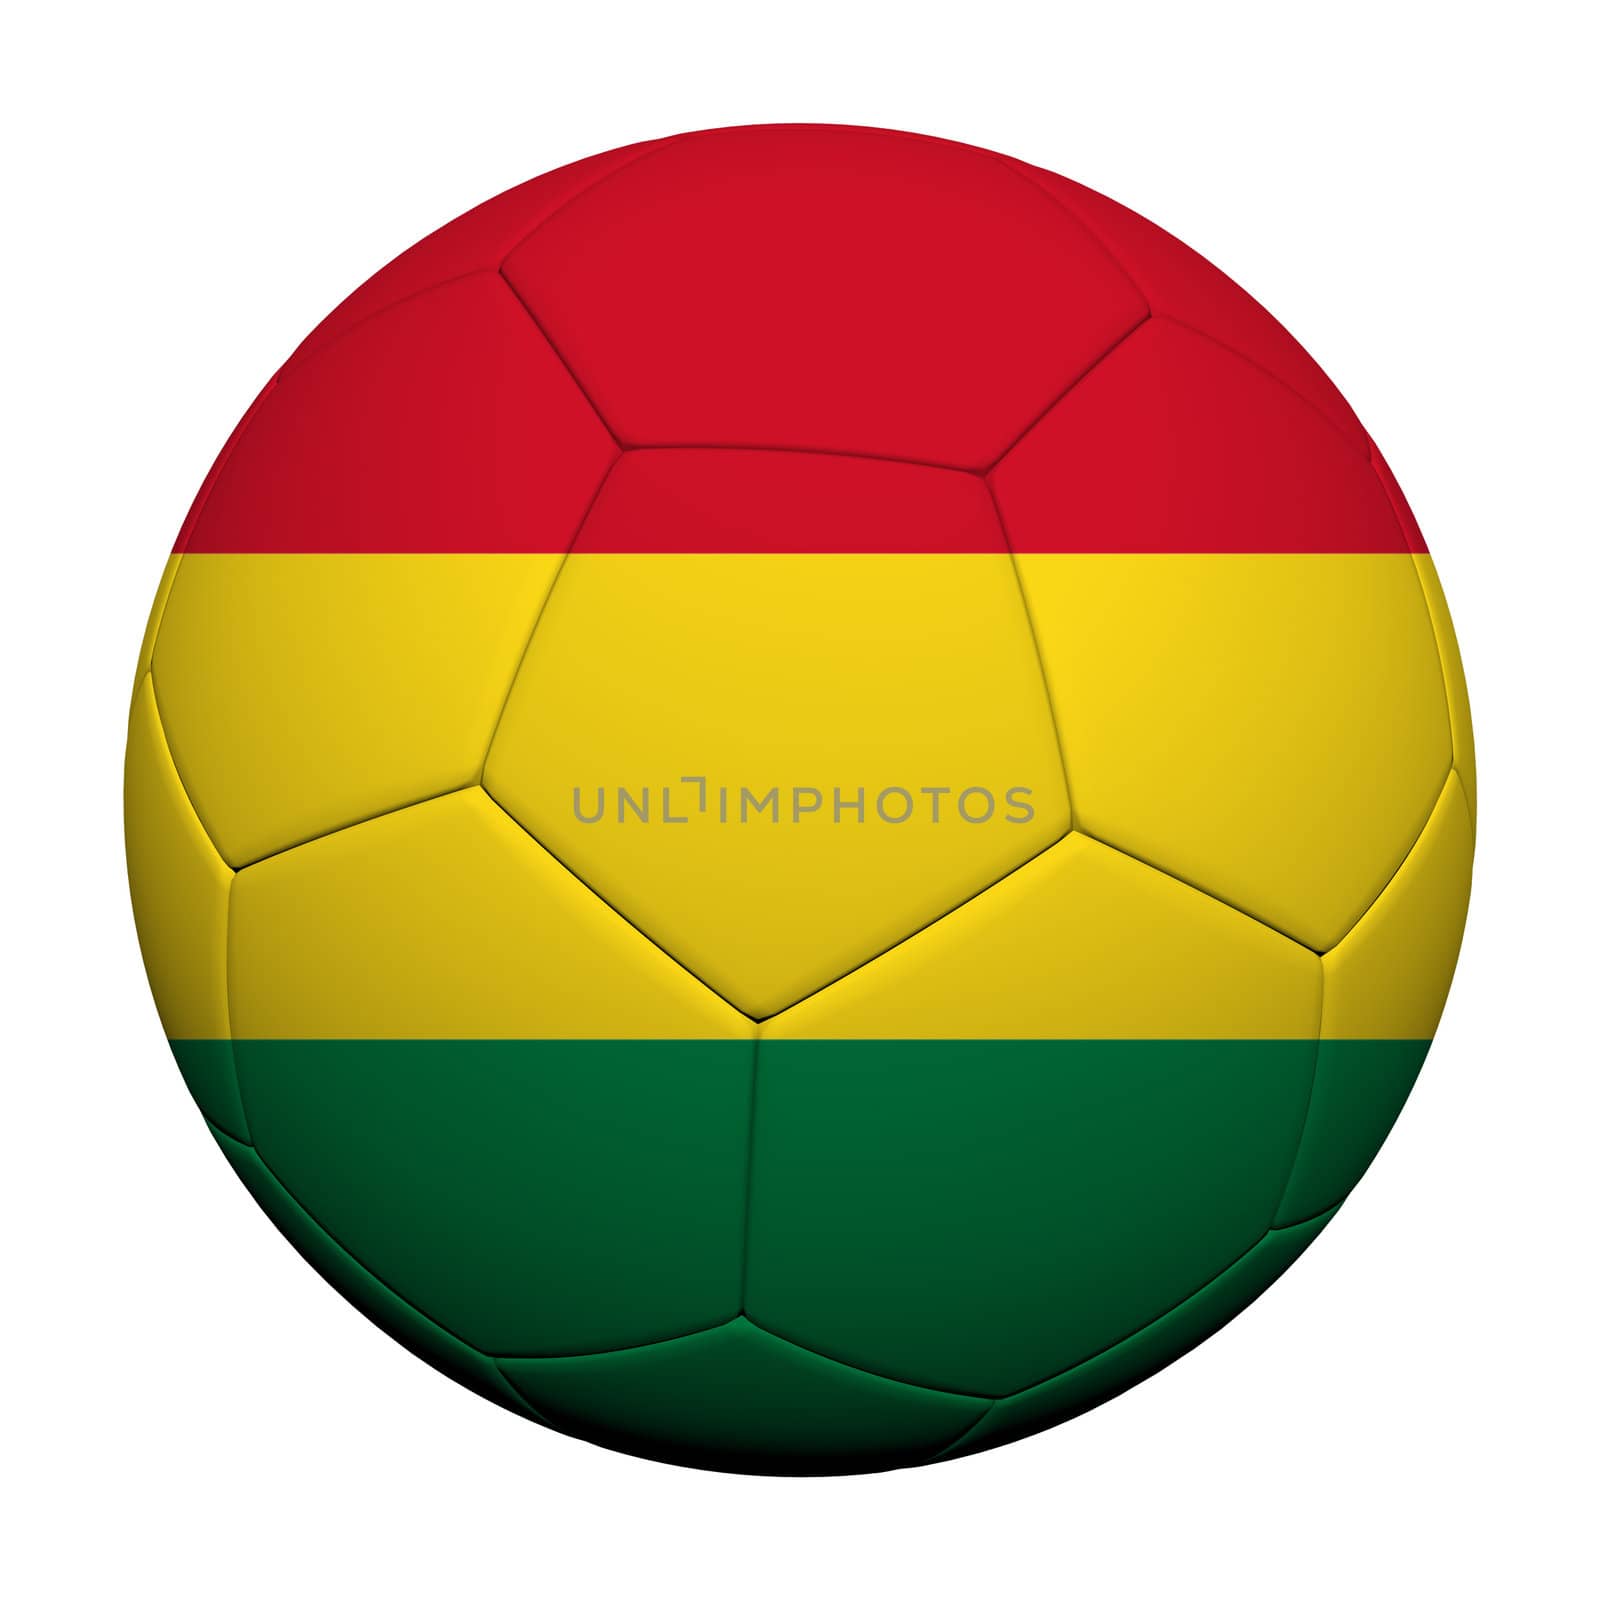 Bolivia Flag Pattern 3d rendering of a soccer ball 